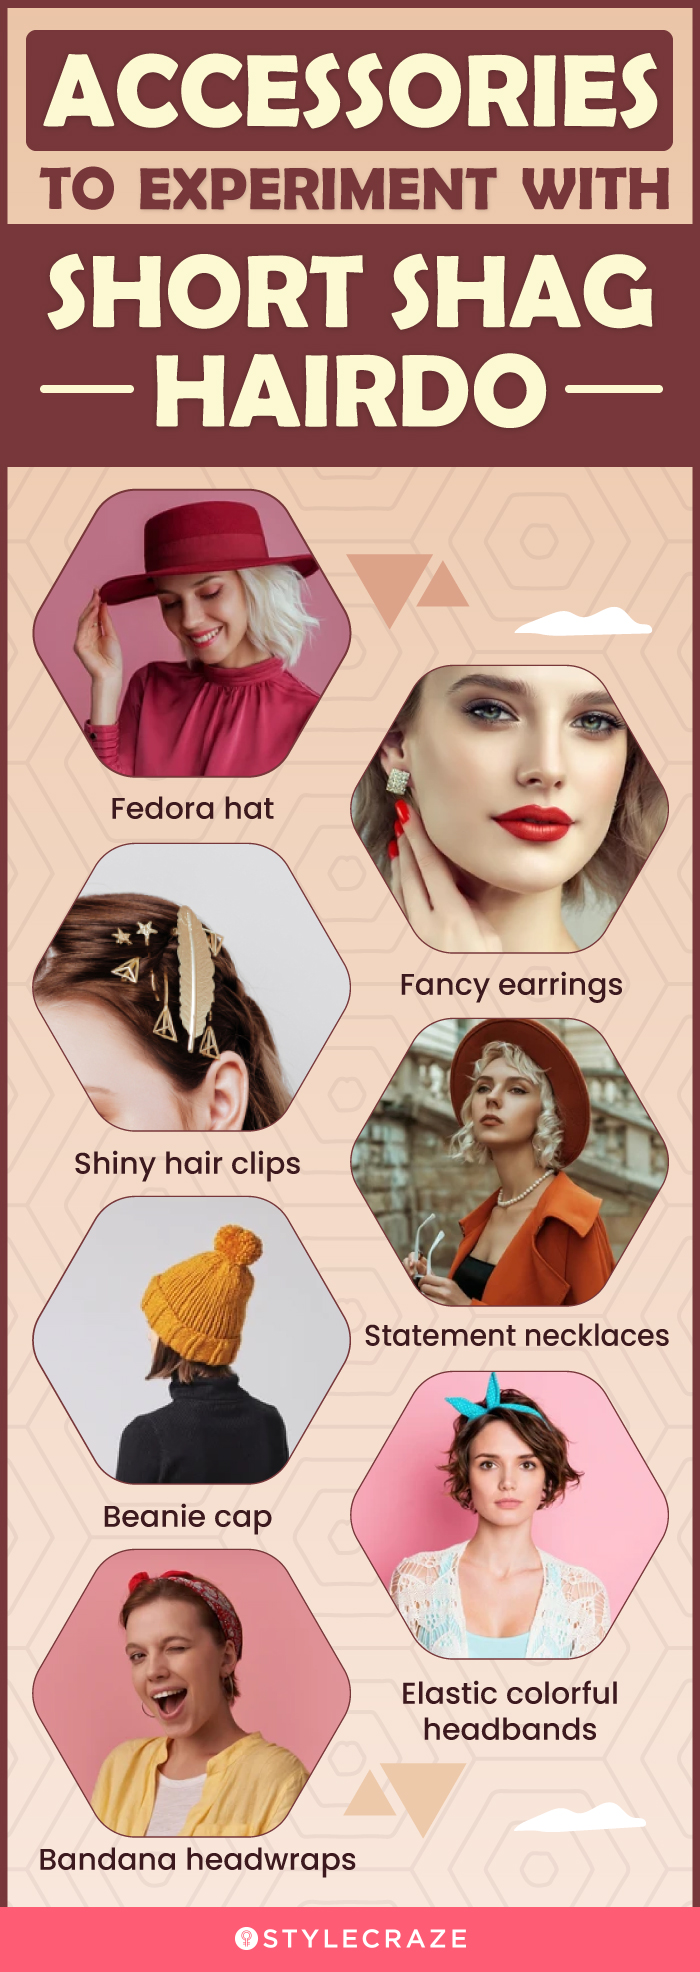 accessories to experiment with short shag hairdo (infographic)